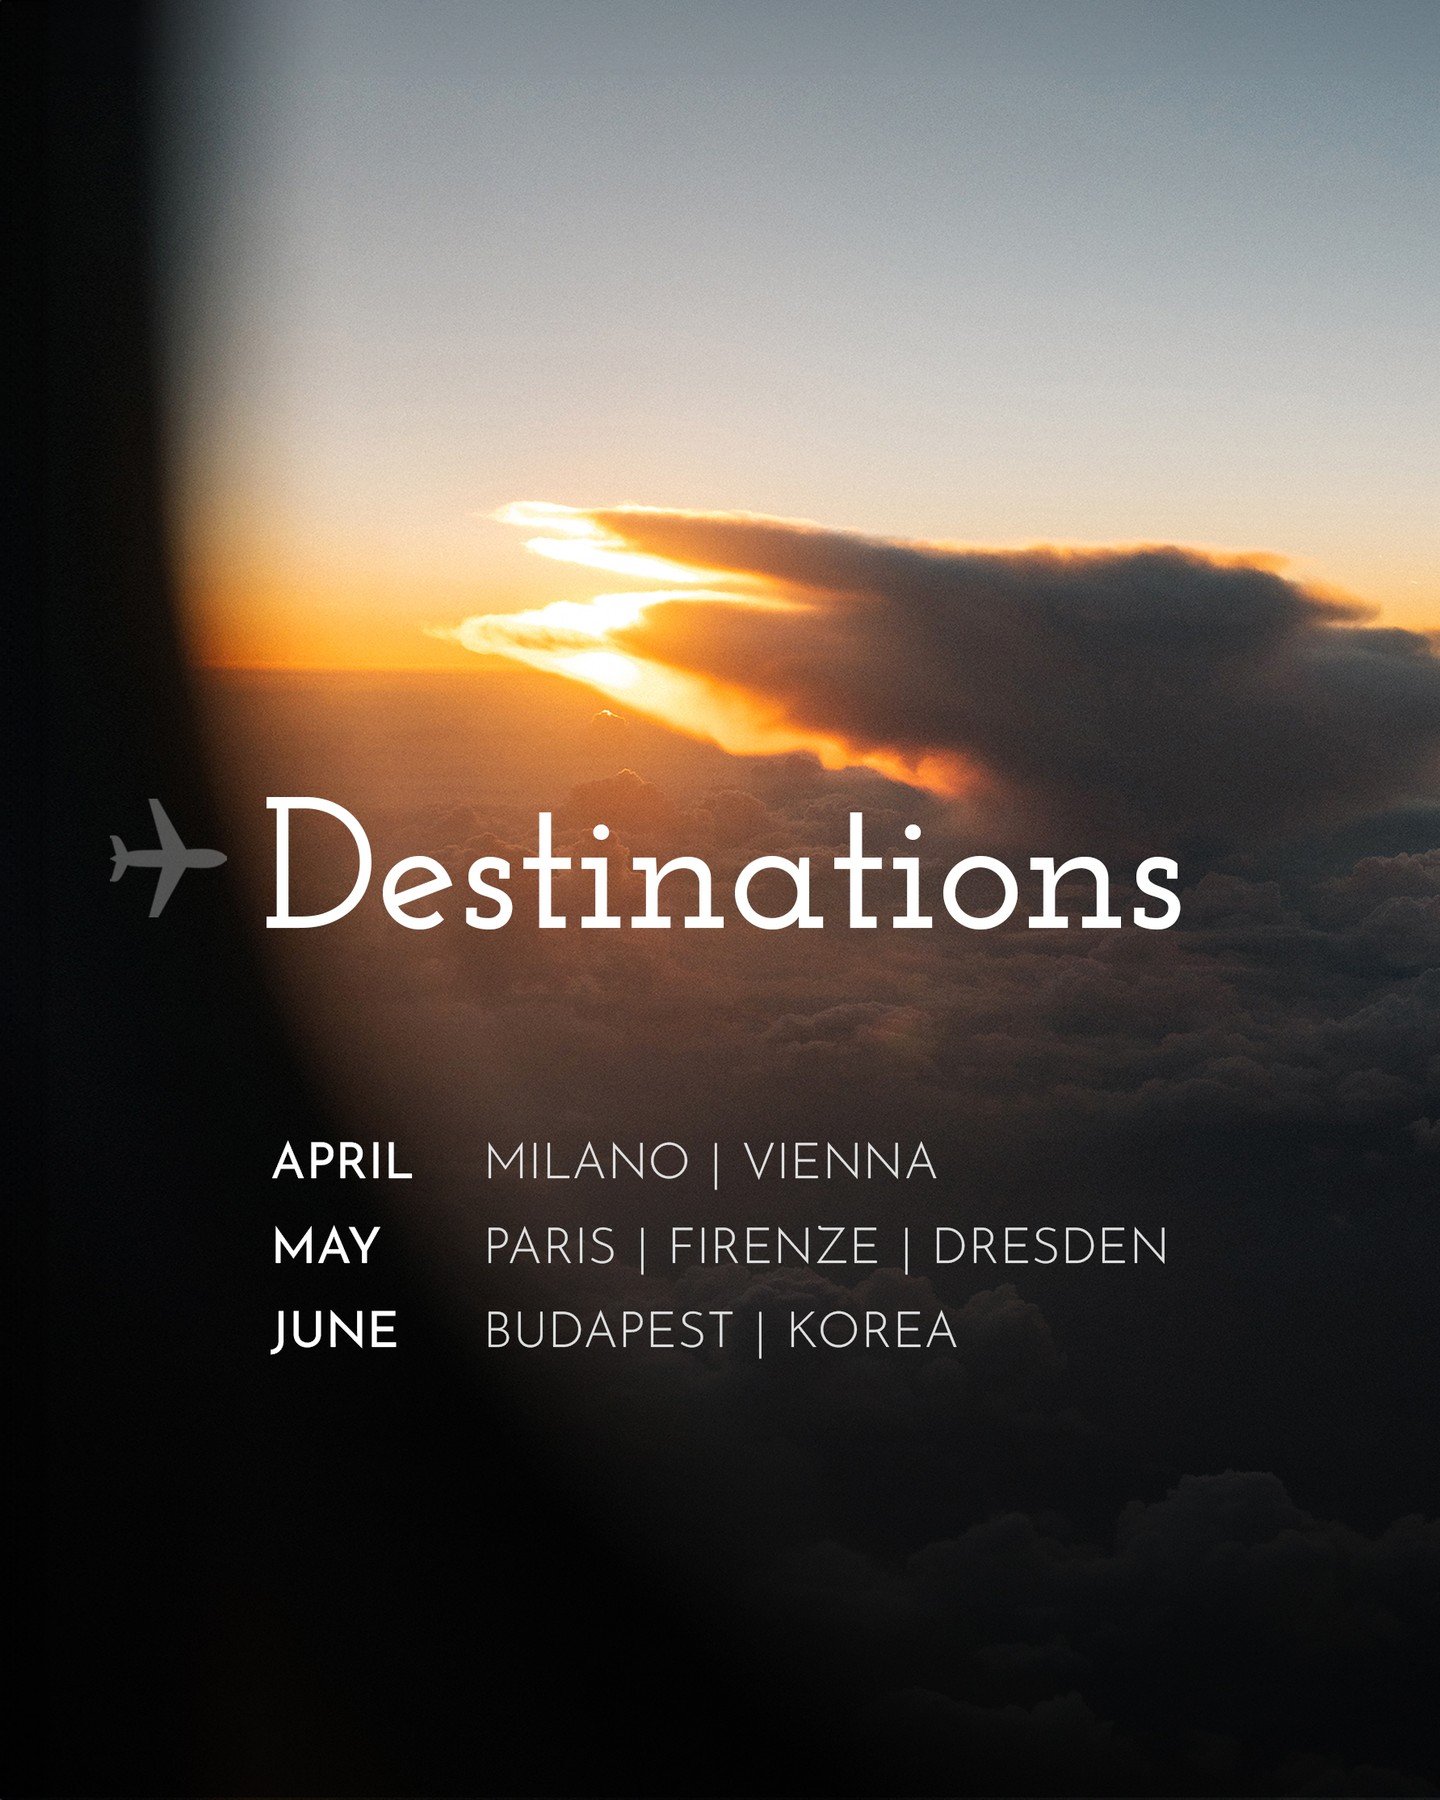 📅 Destinations - confirmed schedule so far
2024
April - Milan | Vienna
May - Paris | Firenze | Dresden
June - Budapest | Korea

Prague is available all-year

💬 DM / email me for still available dates and pricing!

📅 데스티네이션 촬영 - 확정 스케줄
2024
4월 - 밀라